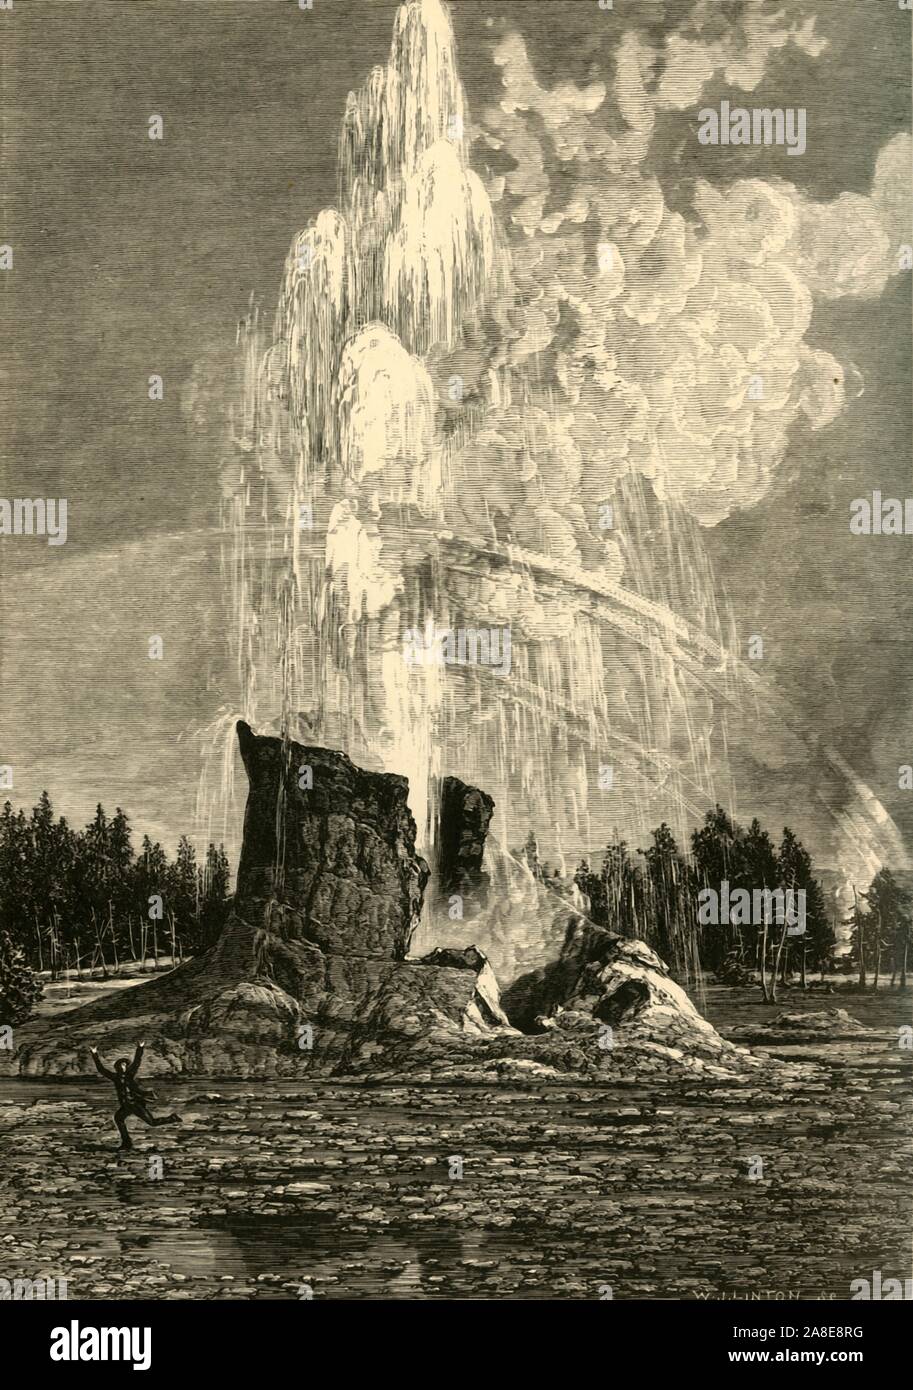 'The Giant Geyser', 1872. Geothermal feature in Yellowstone National Park, Wyoming, USA. '... a tremendous geyser, which has been called the Giant. It throws a column of water the size of the opening to the measured altitude of one hundred and thirty feet, and continues the display for an hour and a half. The amount of water discharged was immense, about equal in quantity to that in the river, the volume of which, during the eruption, was doubled'. From &quot;Picturesque America; or, The Land We Live In, A Delineation by Pen and Pencil of the Mountains, Rivers, Lakes...with Illustrations on St Stock Photo